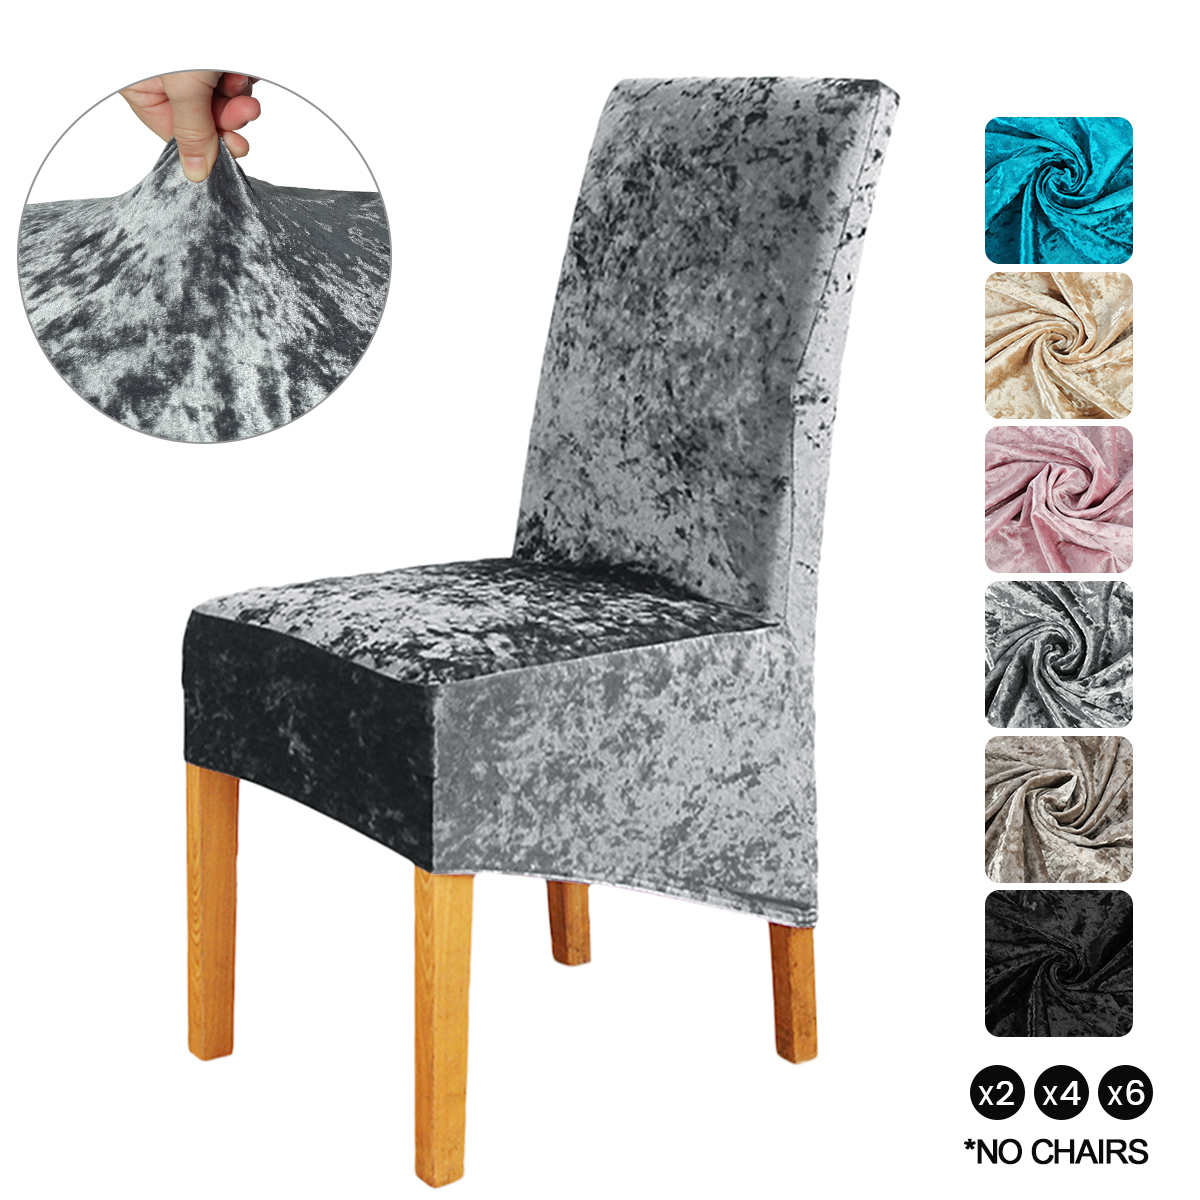 Crushed Velvet Stretch Dining Chair Covers Protective Slipcover Home Decor UK 